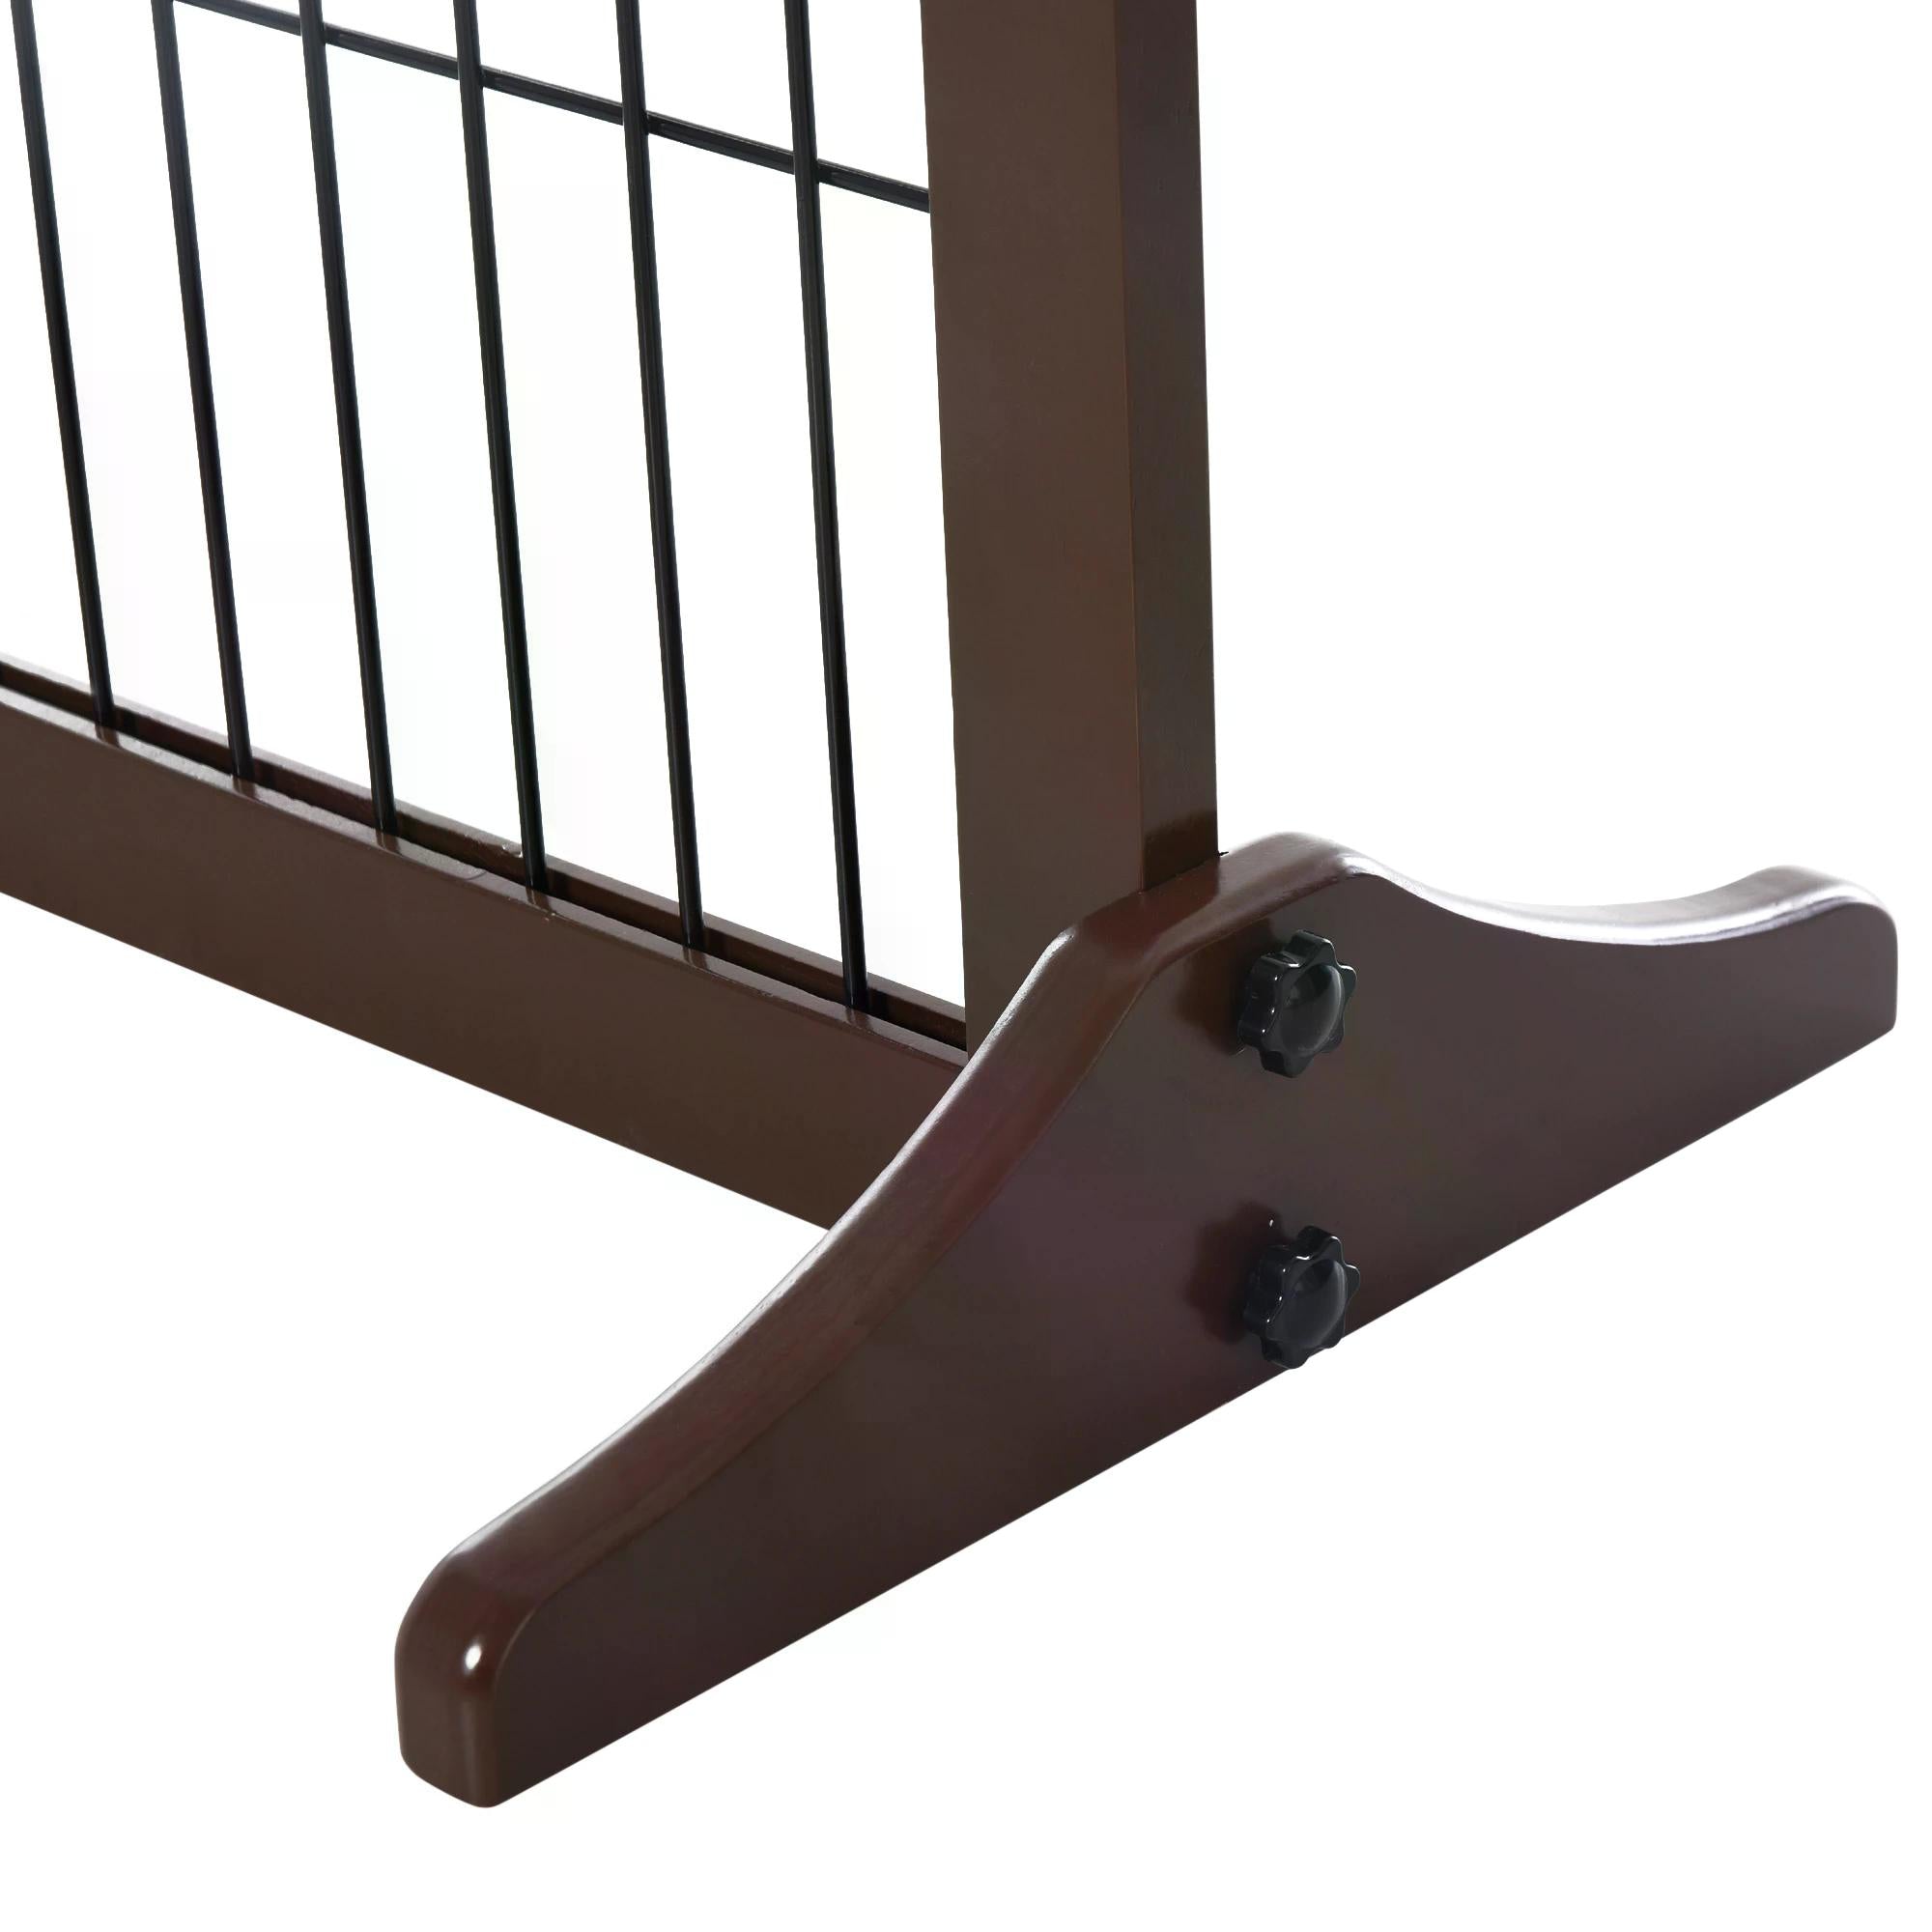 PawHut 3 Panel Pet Gate Pine Frame Indoor Foldable Dog Barrier w/Supporting Foot Dividing Line Aisles Stairs